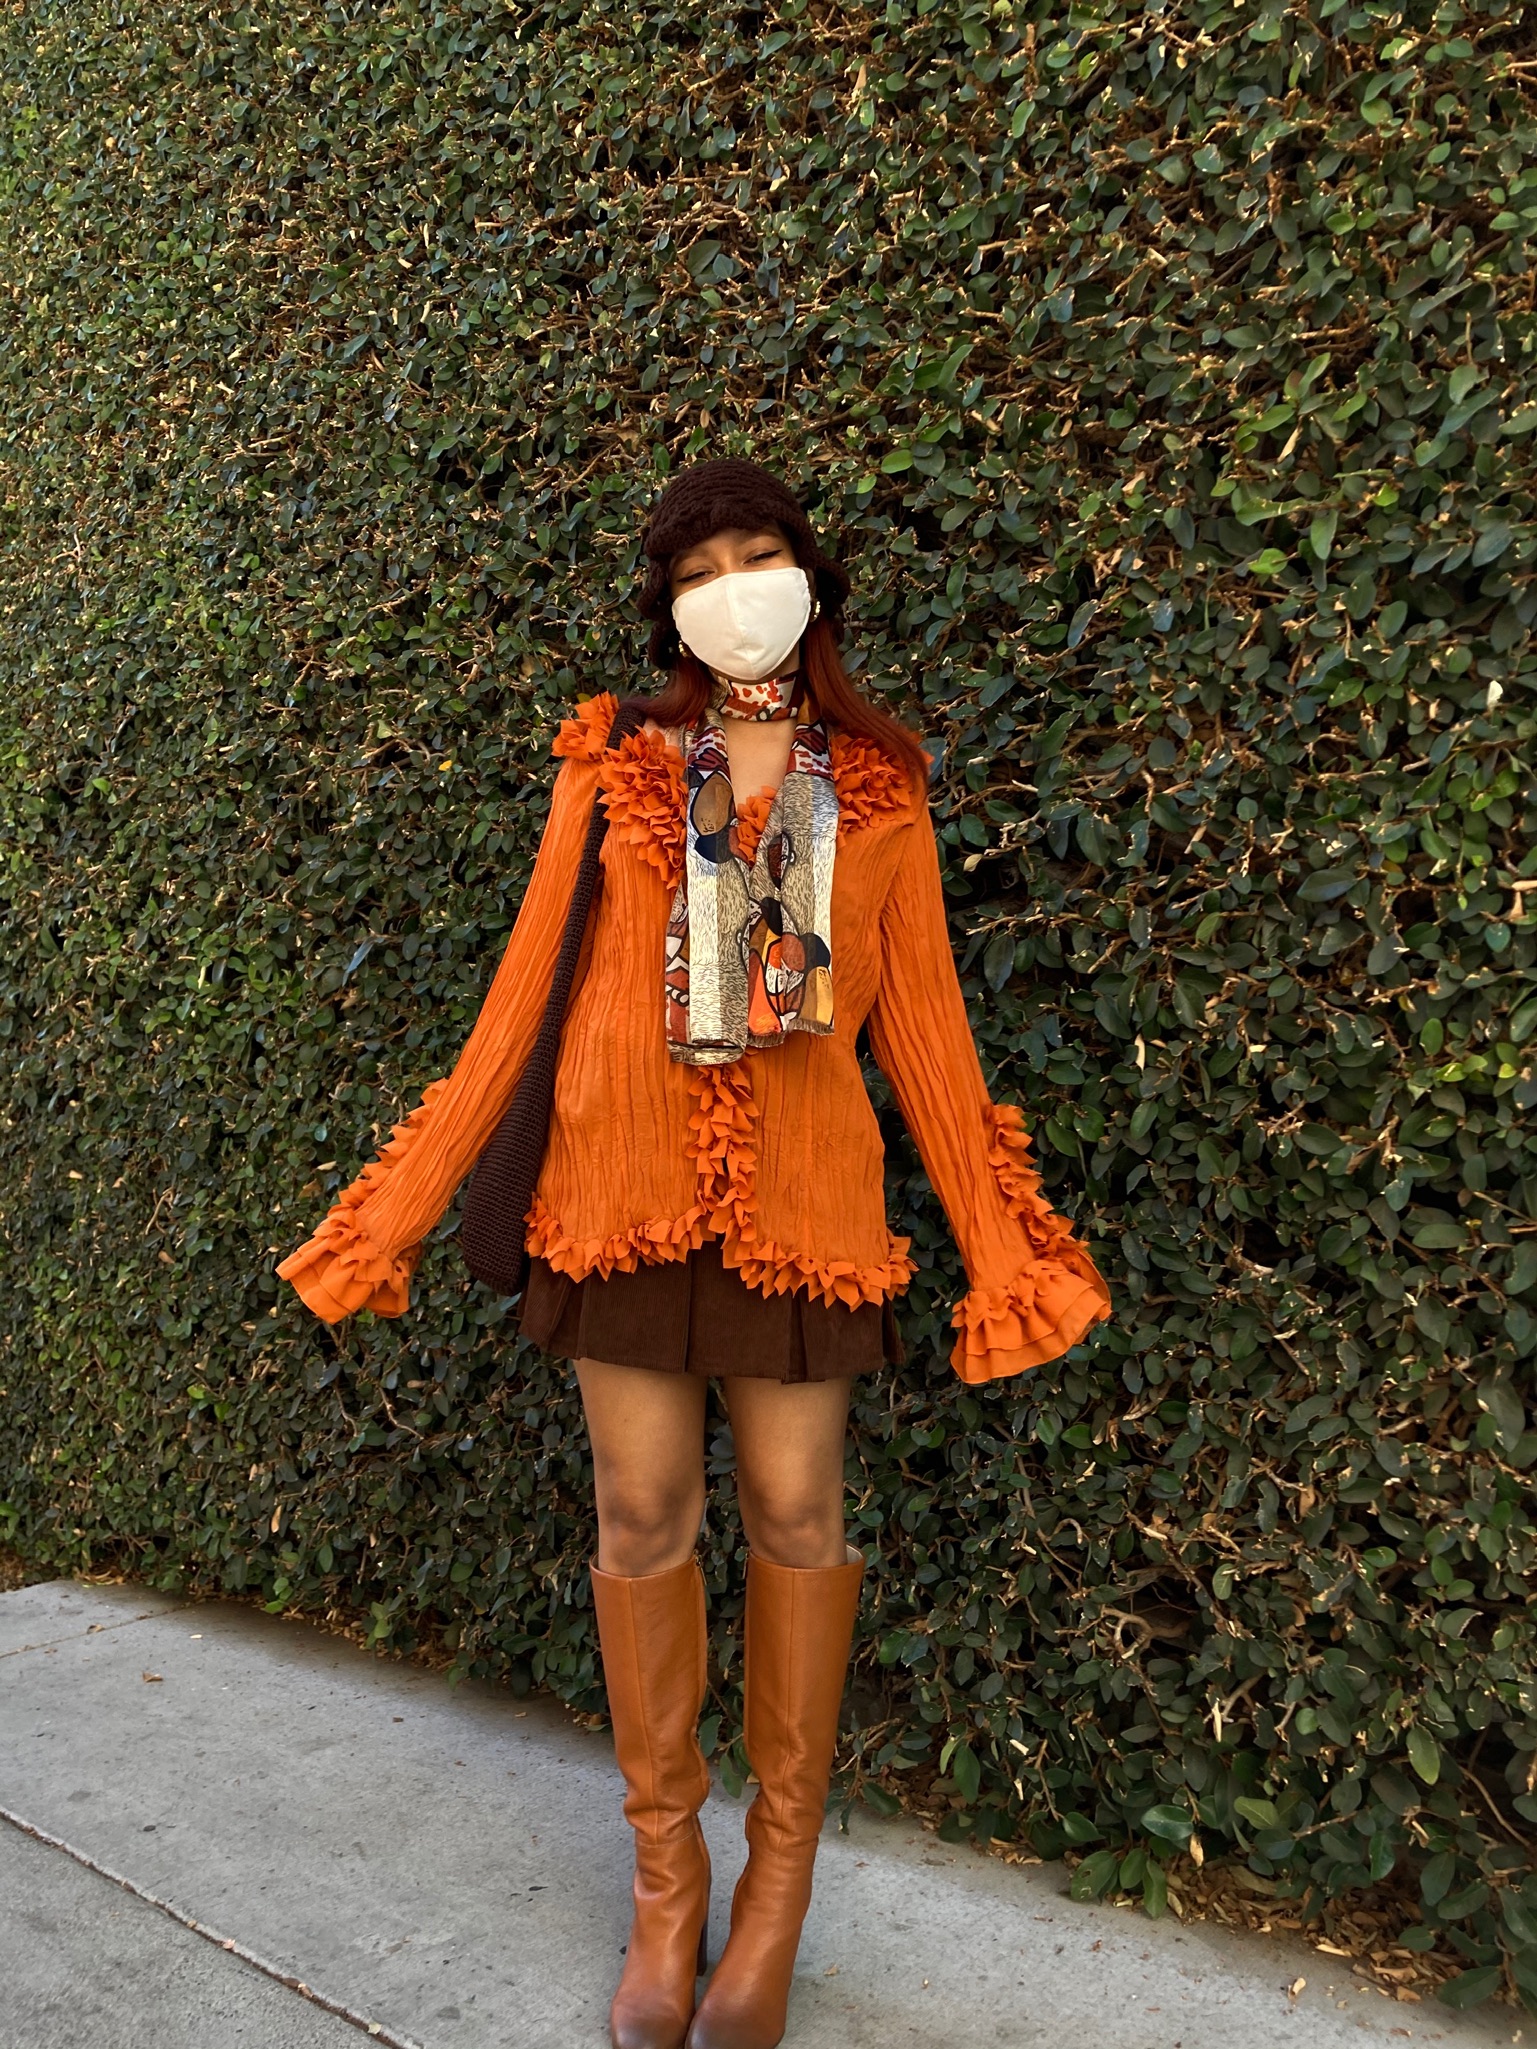 Person standing in front of shaped hedge wearing orange and brown-toned vintage inspired outfit with mini skirt and tall leather boots